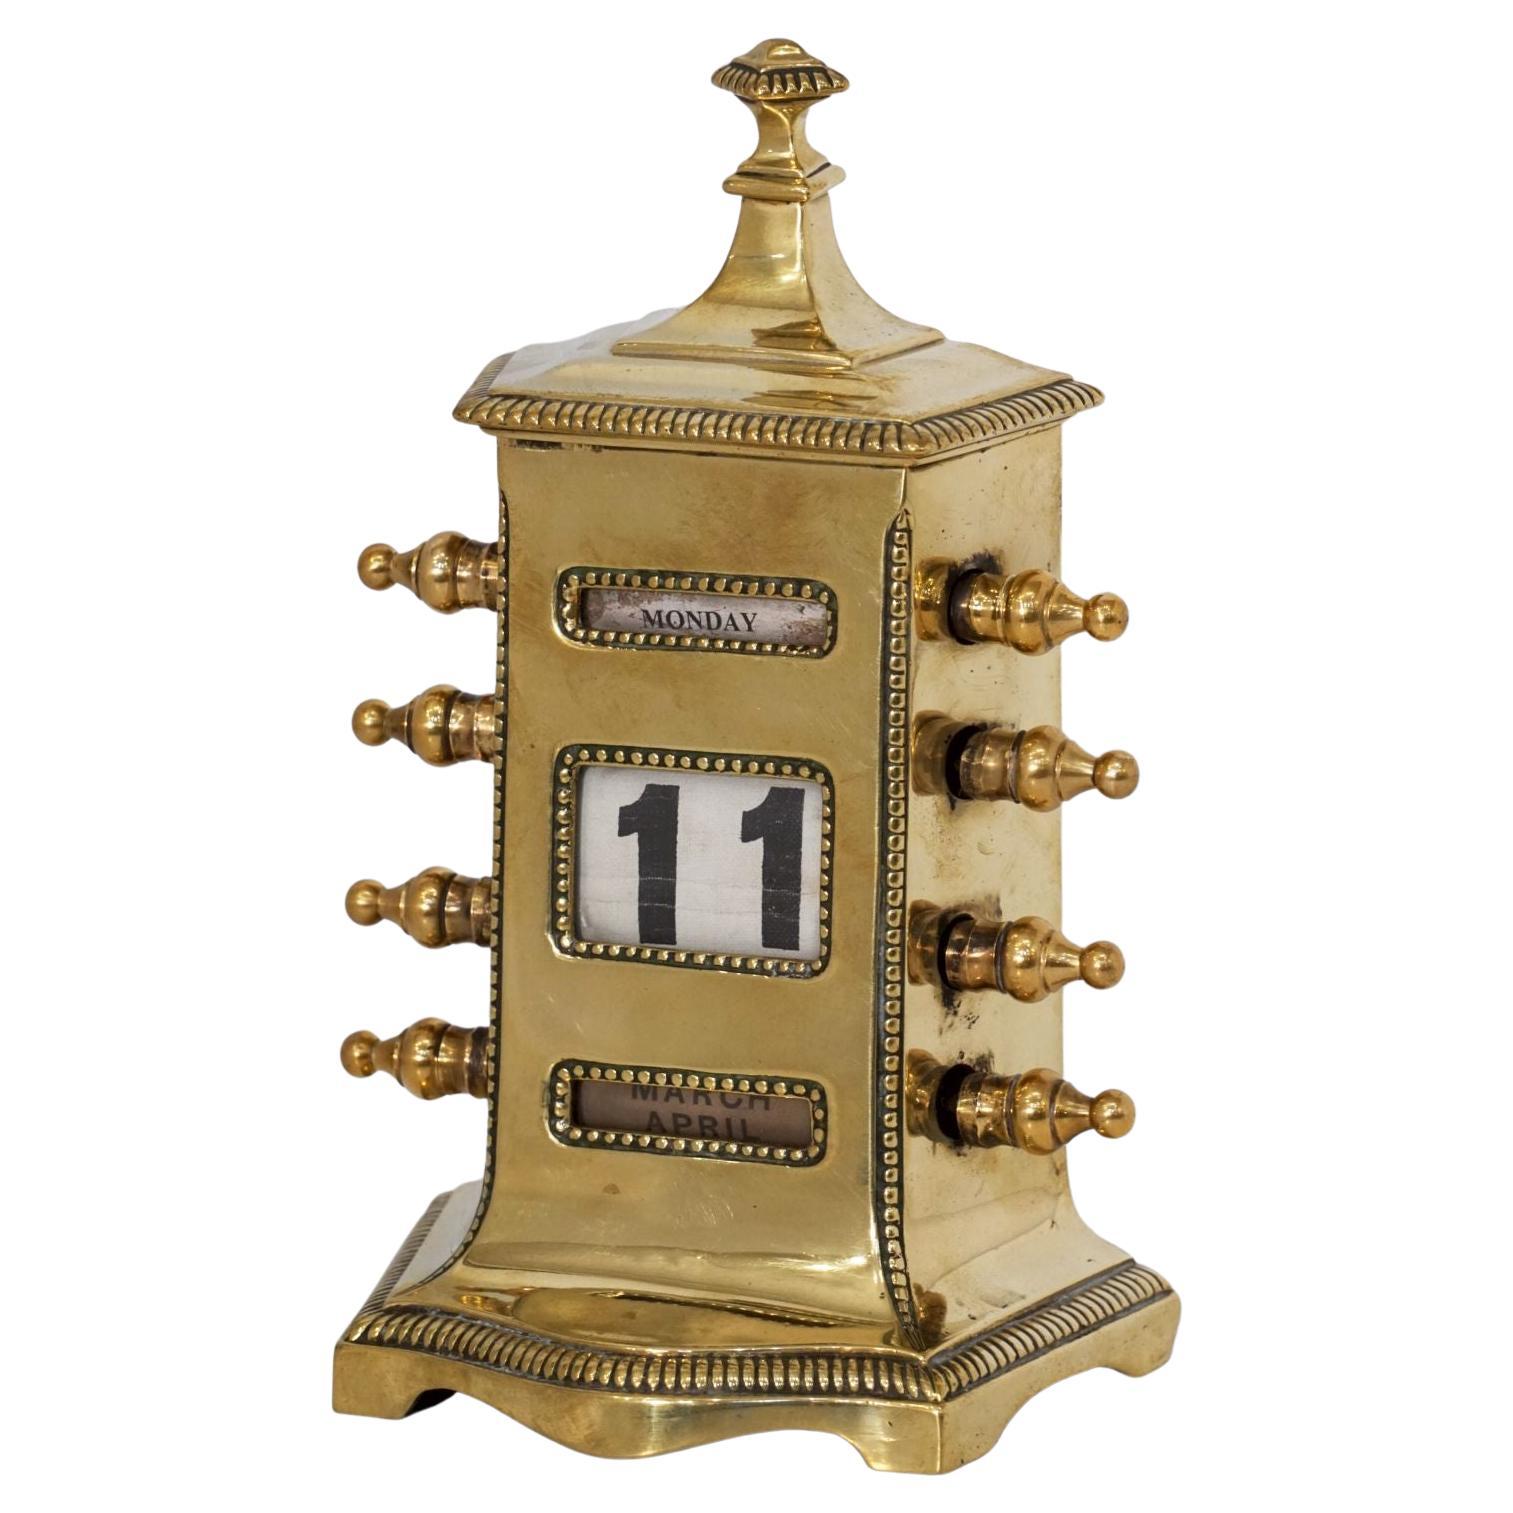 English Perpetual Calendar of Brass by William Tonks & Sons